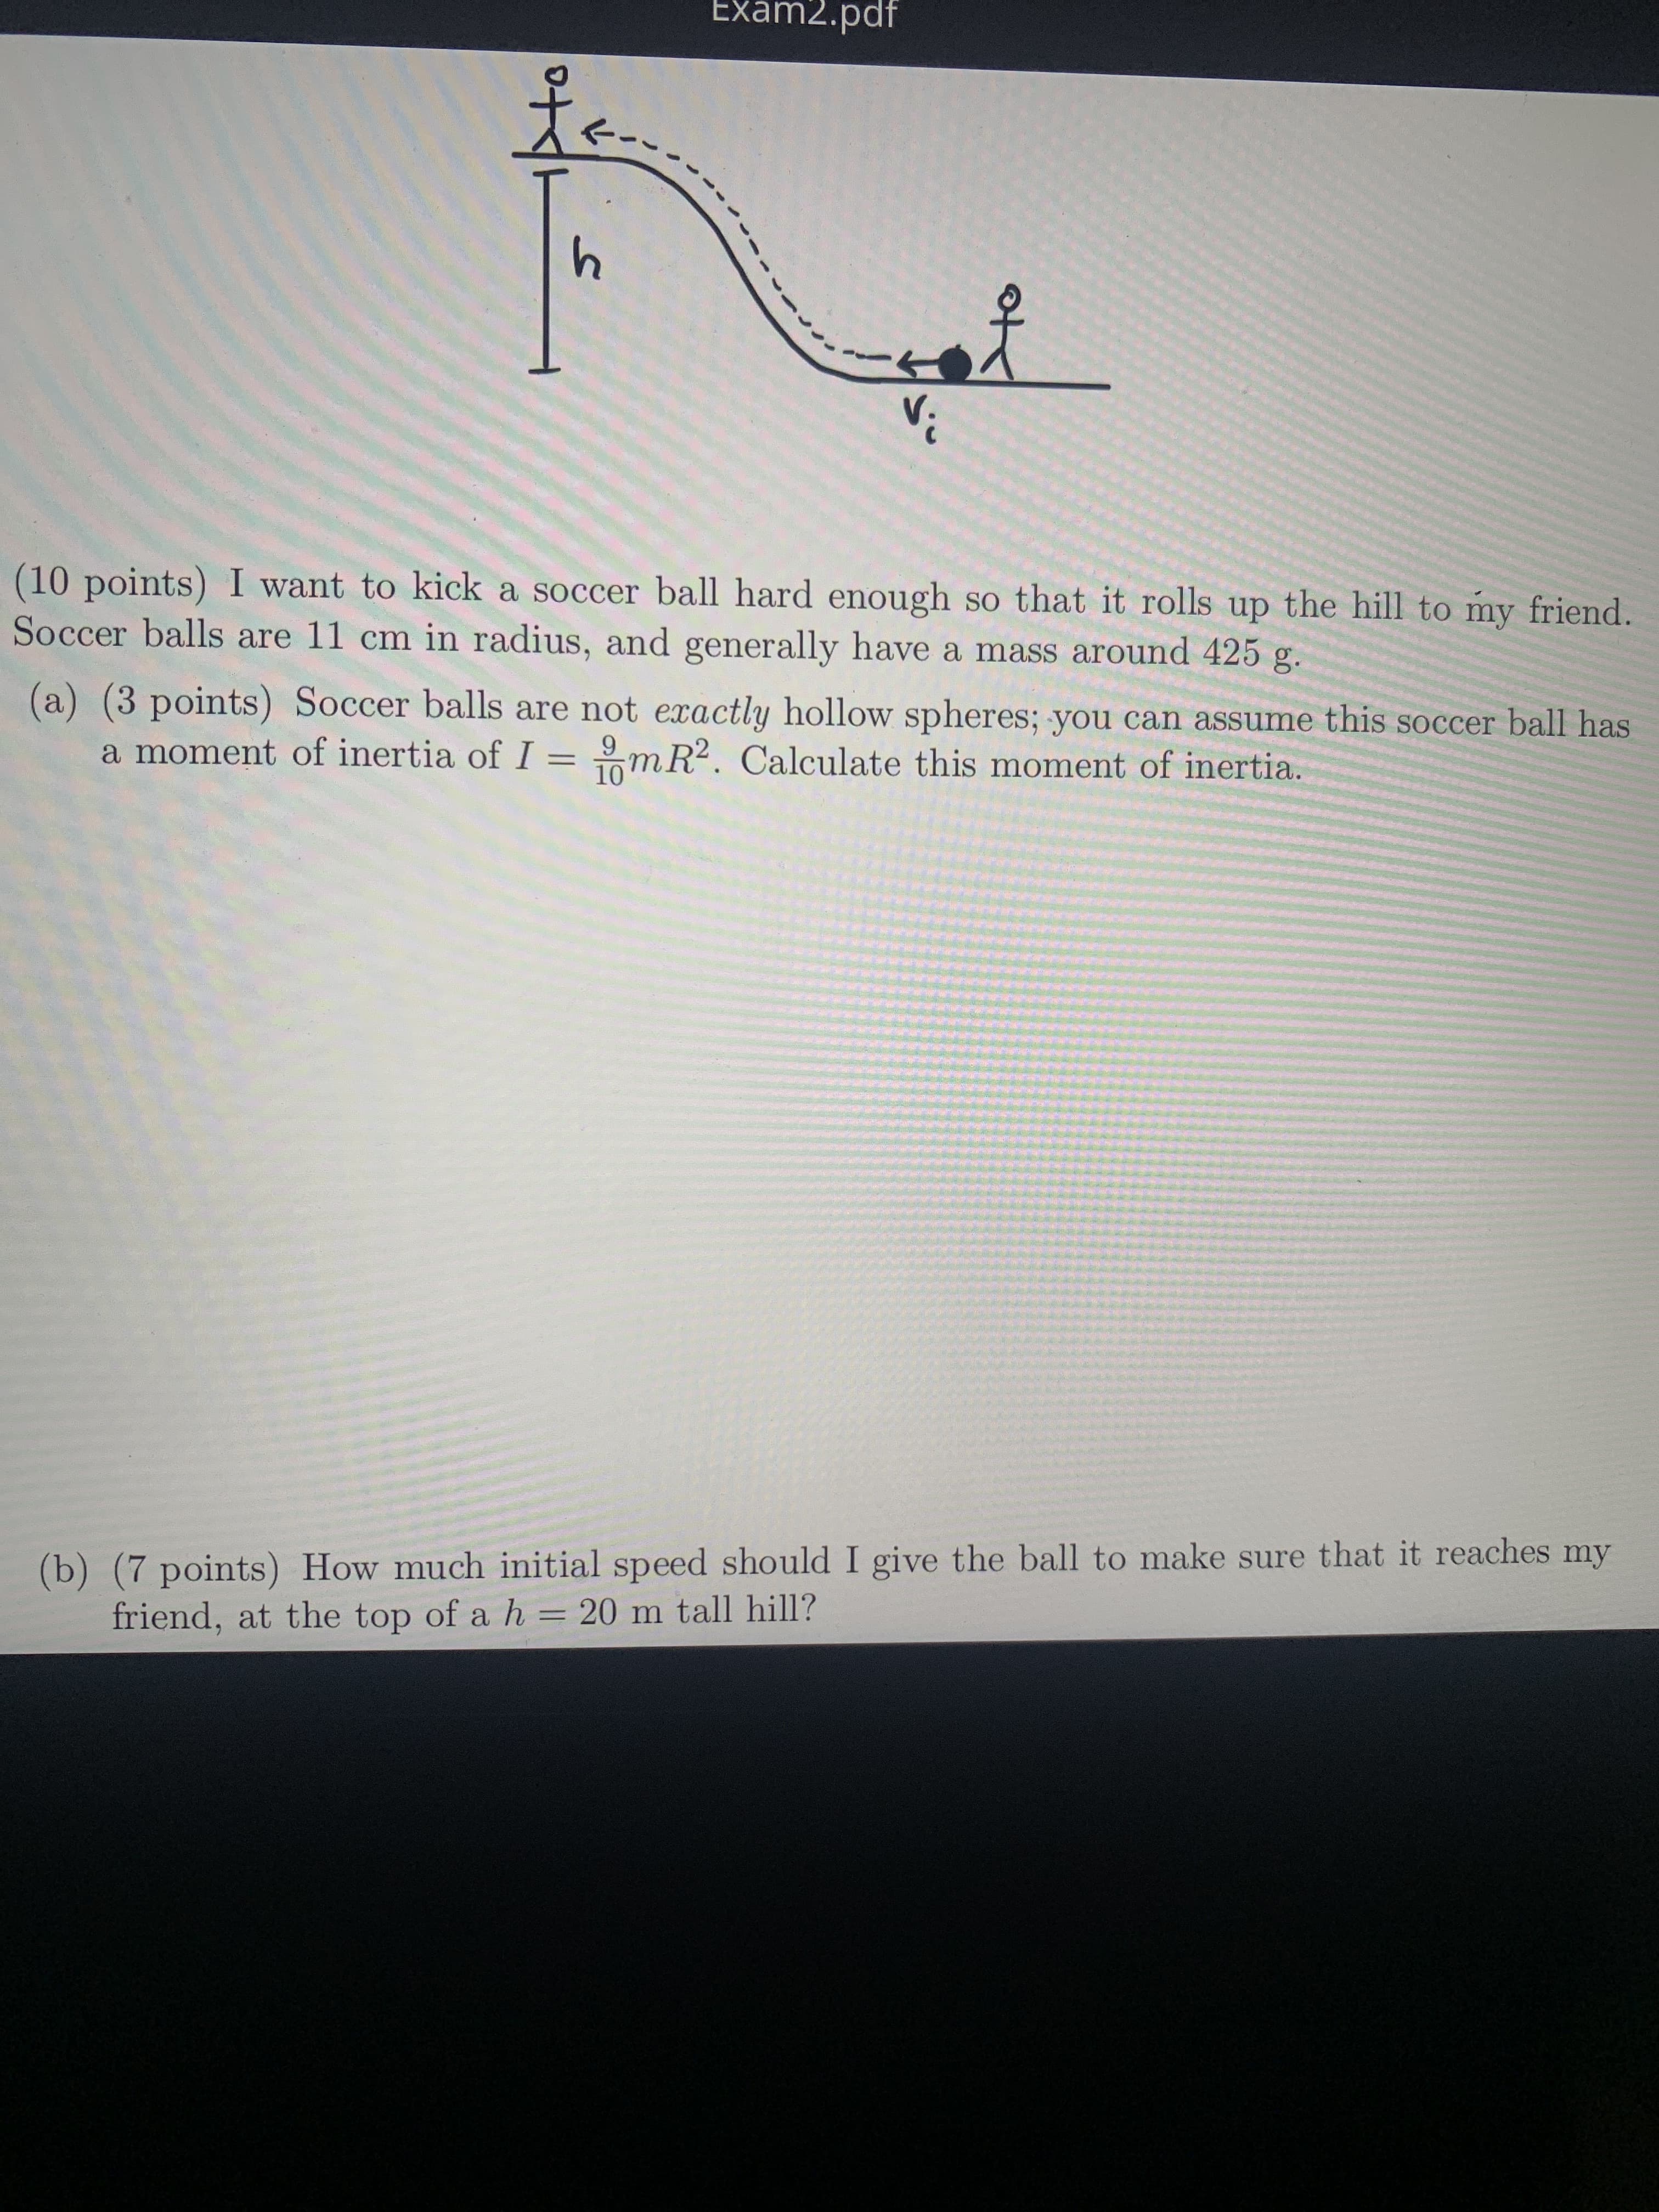 Exam2.pdf
(10 points) I want to kick a soccer ball hard enough so that it rolls up the hill to my friend.
Soccer balls are 11 cm in radius, and generally have a mass around 425 g.
(a) (3 points) Soccer balls are not exactly hollow spheres; you can assume this soccer ball has
a moment of inertia of I =mR2. Calculate this moment of inertia.
9.
10
(b) (7 points) How much initial speed should I give the ball to make sure that it reaches my
friend, at the top of a h = 20 m tall hill?
%3D
